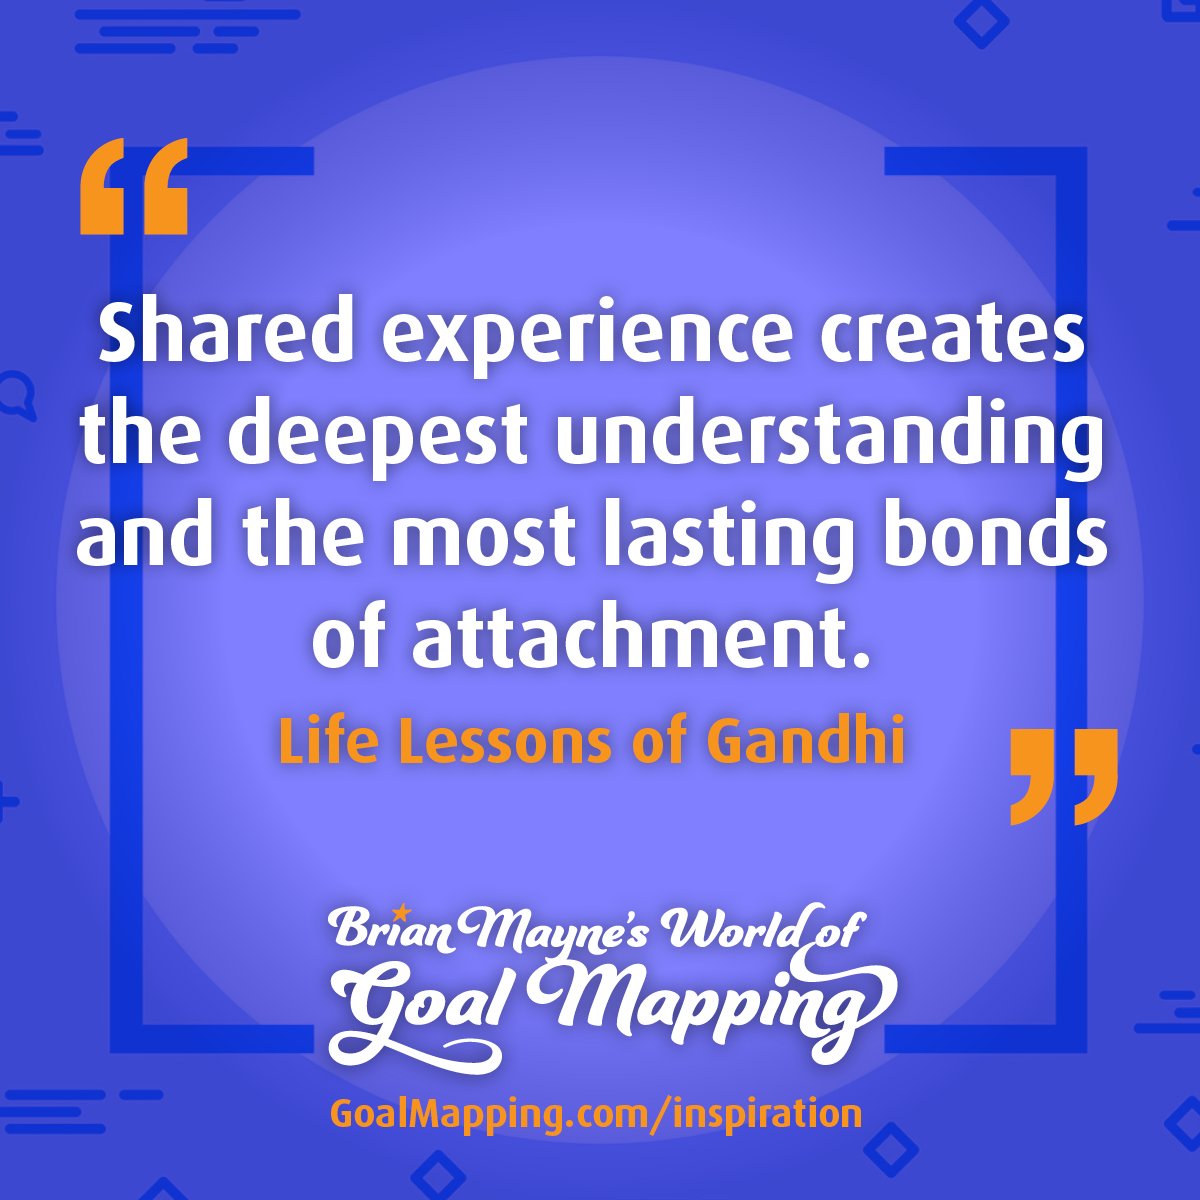 "Shared experience creates the deepest understanding and the most lasting bonds of attachment." Life Lessons of Gandhi